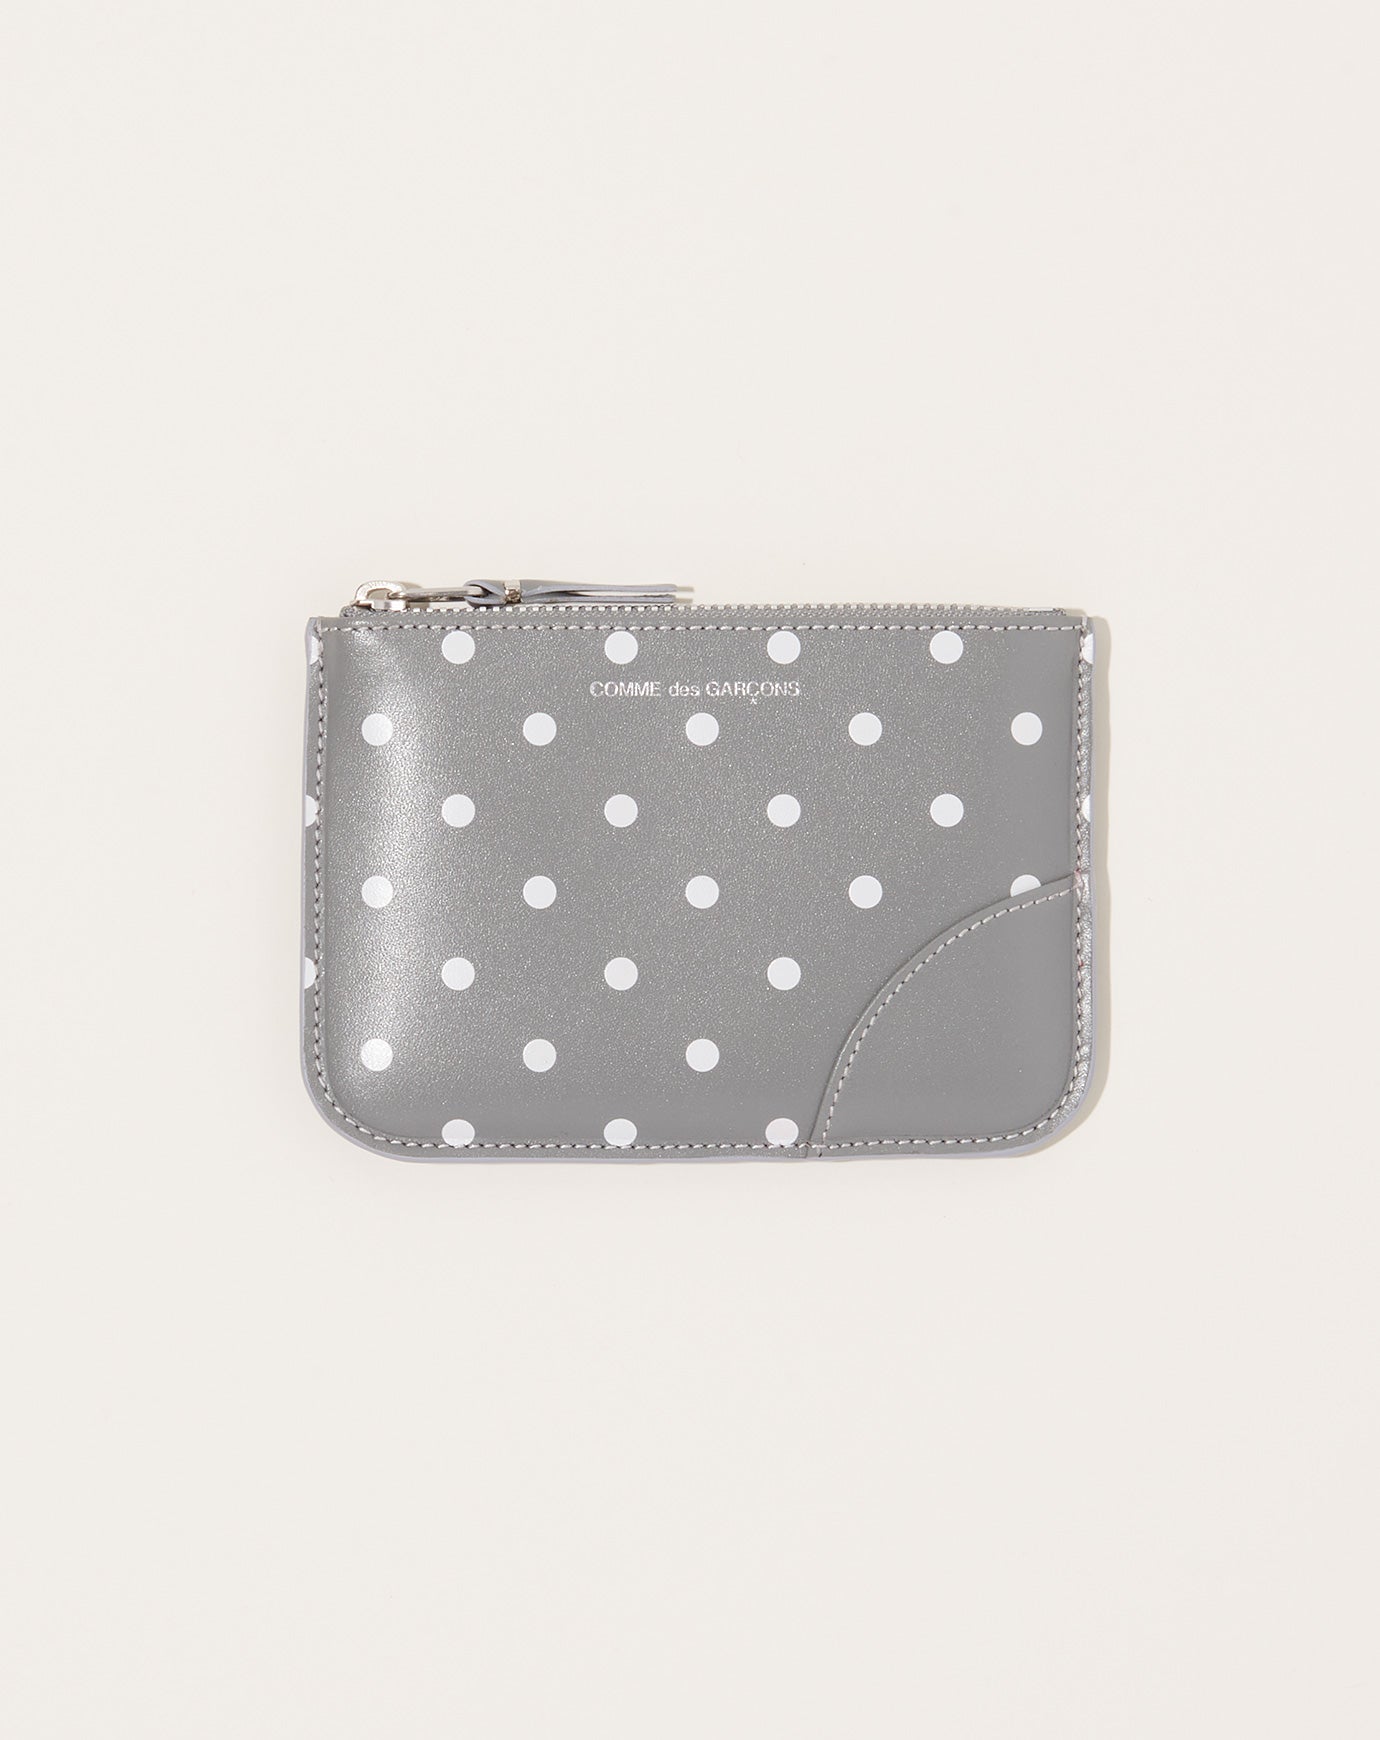 Comme des Garçons  Polka Dots Printed Pouch in Grey